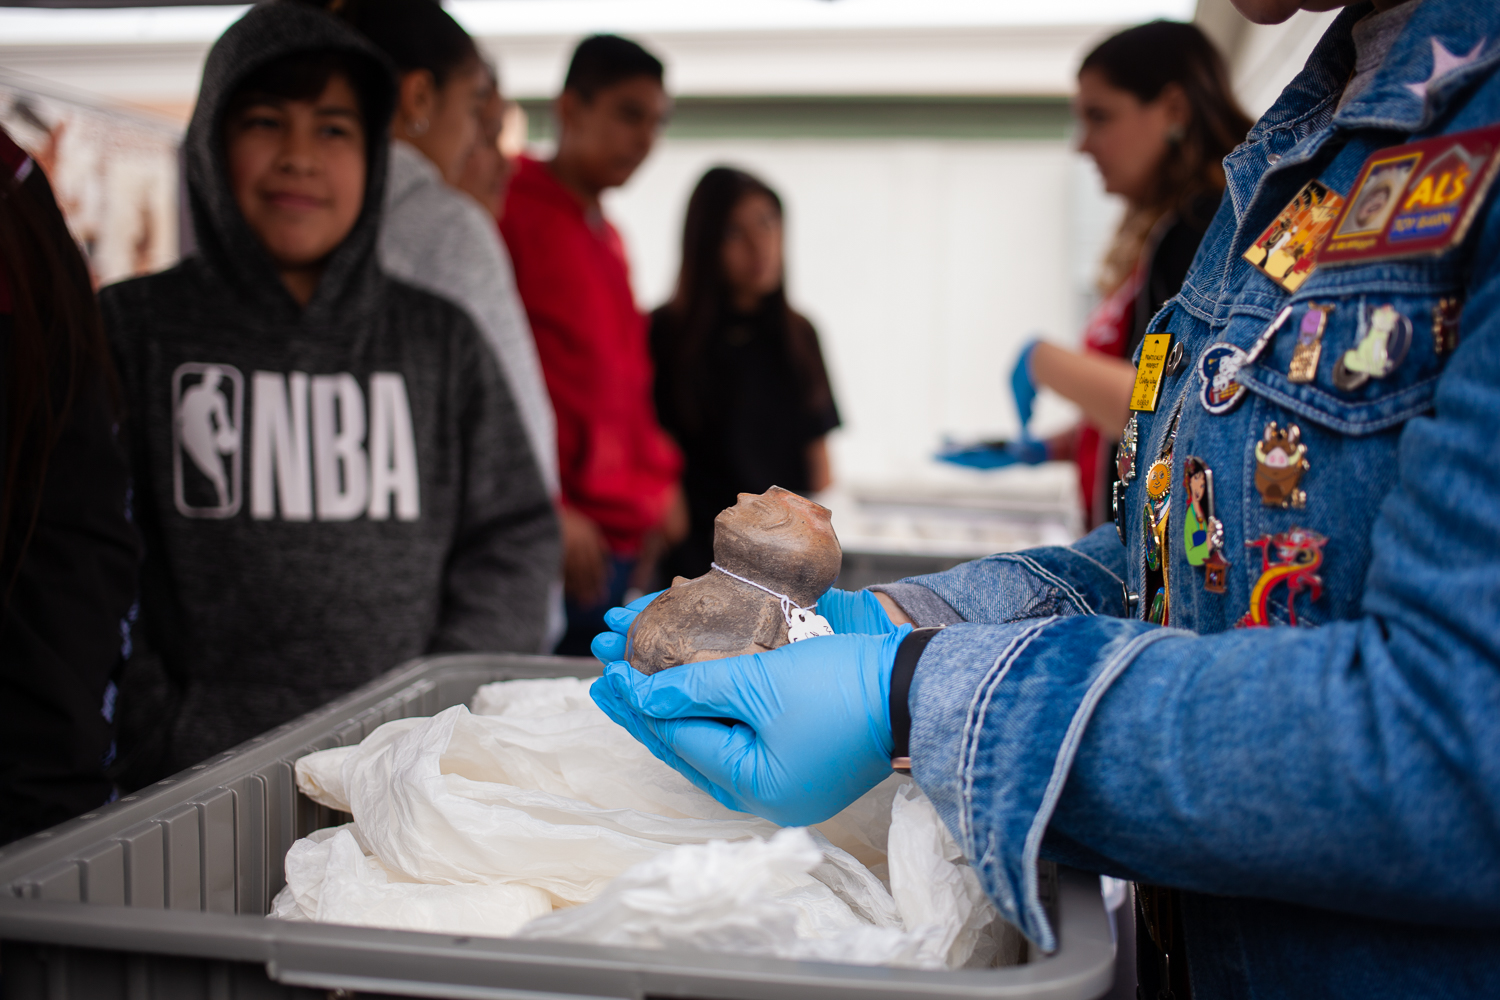 Bell Gardens Intermediate students participate in demonstrations with objects from the Art of the Ancient Americas collection, photos by Stephenie Pashkowsky